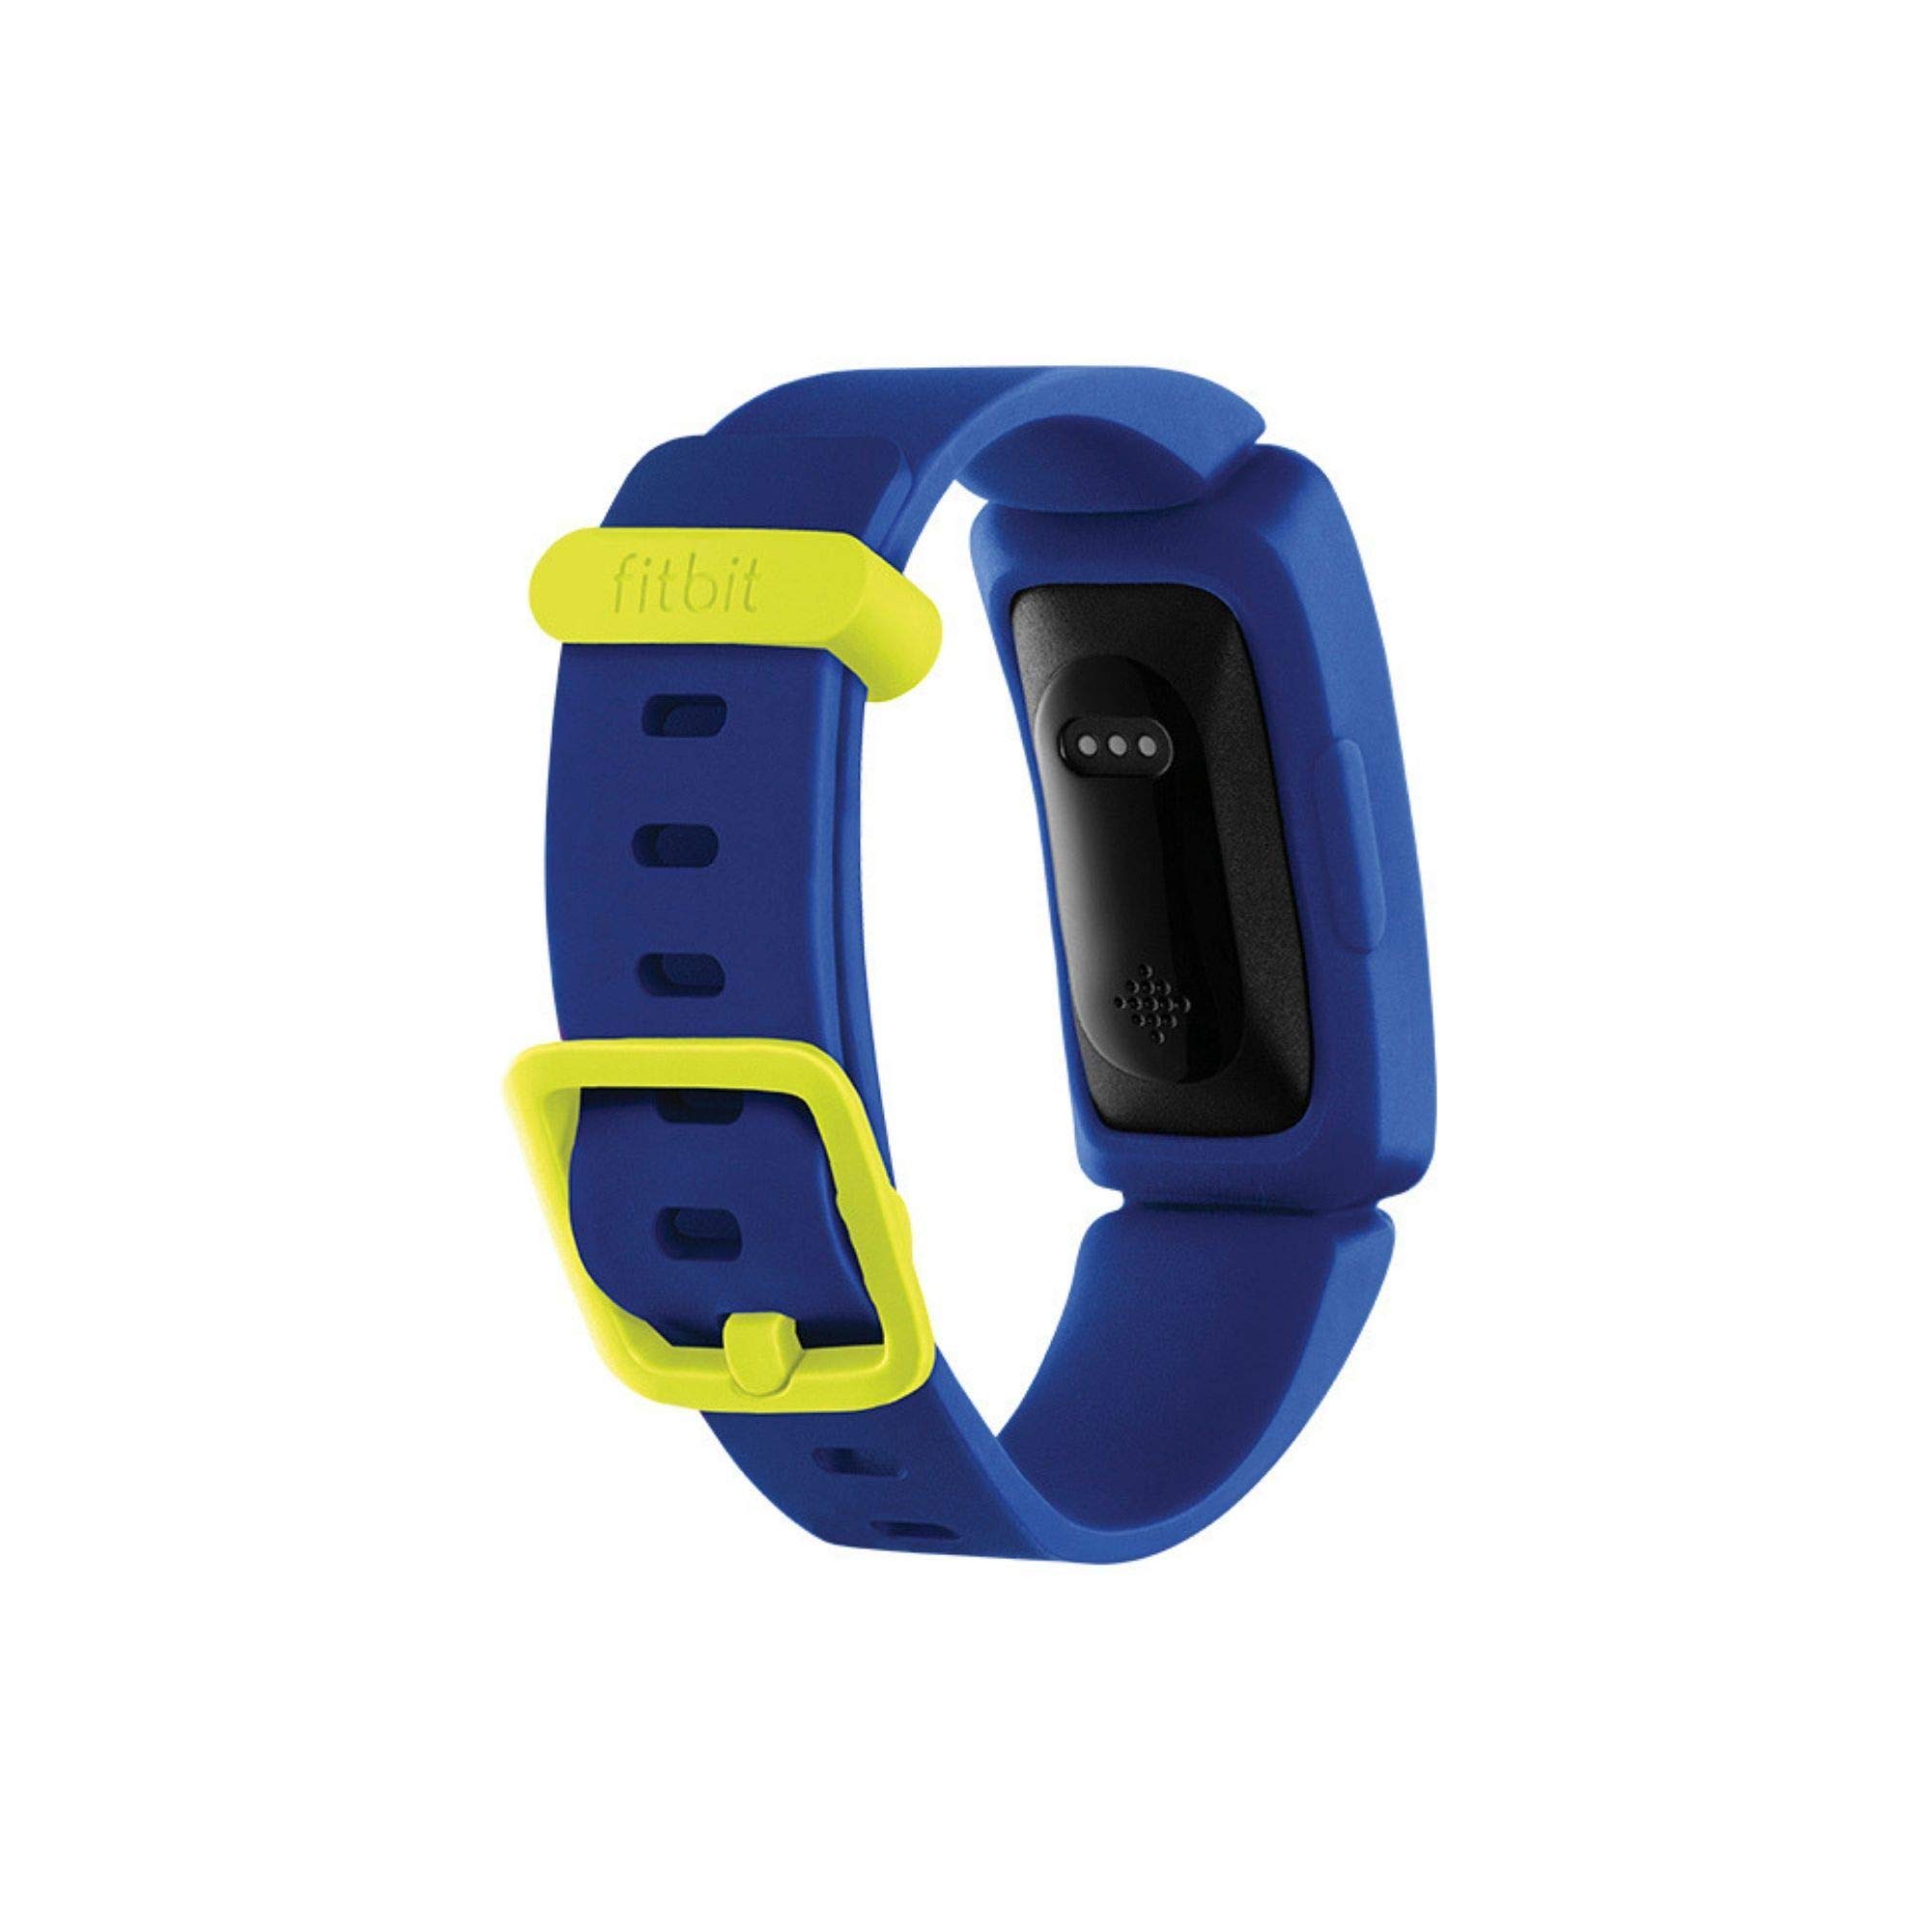 Fitbit Ace 2 Activity Tracker for Kids, 1 Count, Night Sky + Neon Yellow